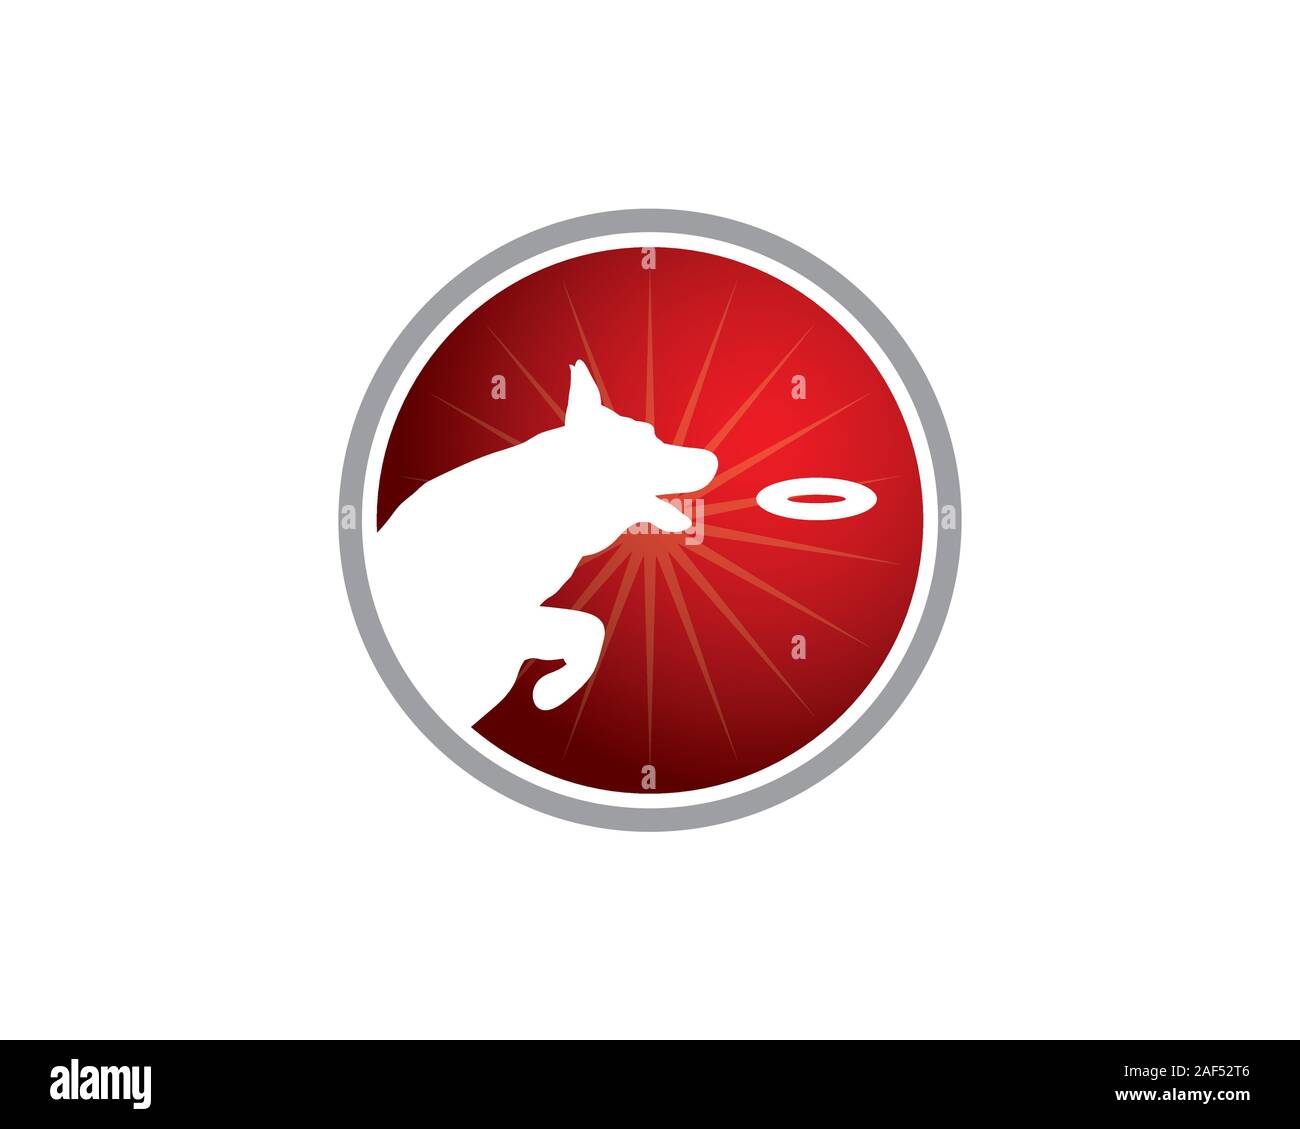 Dog training center logo. Dog silhouette jumping and almost catching an object on a round background in red Stock Vector